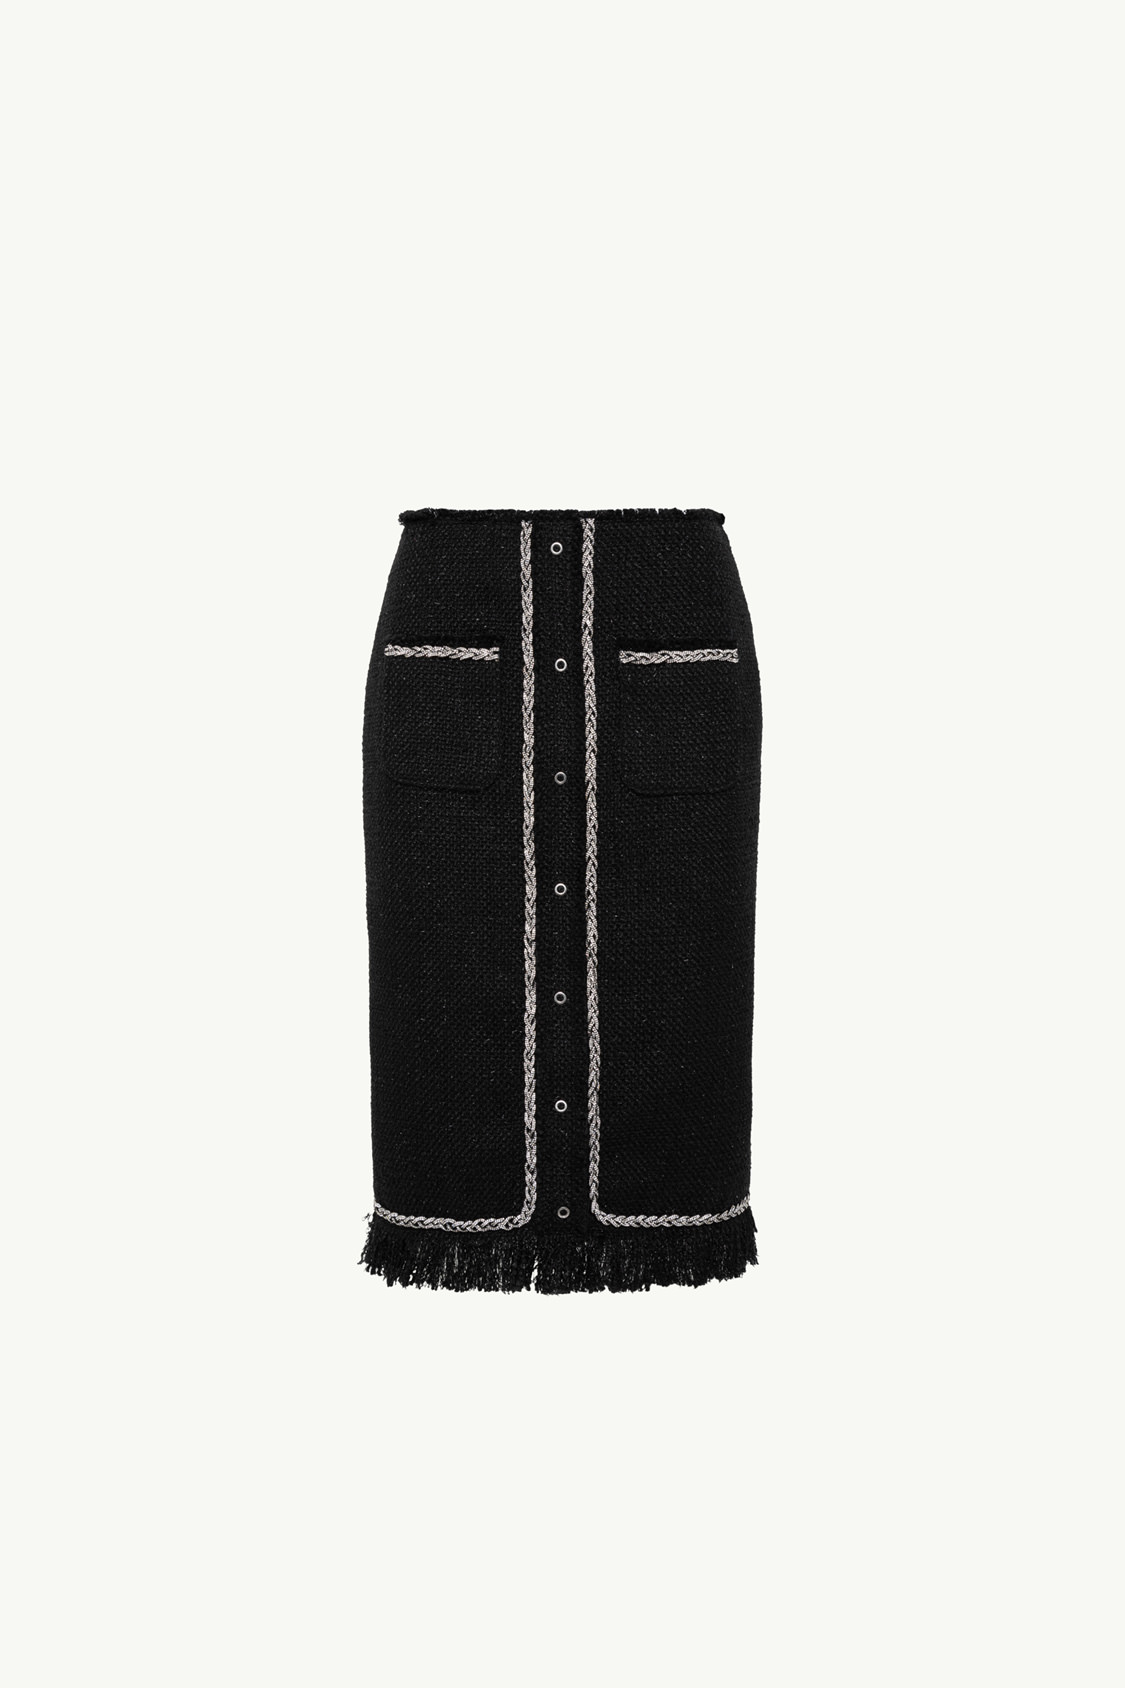 MADE IN ITALY MIDI SKIRT IN BOUCLÉ FABRIC